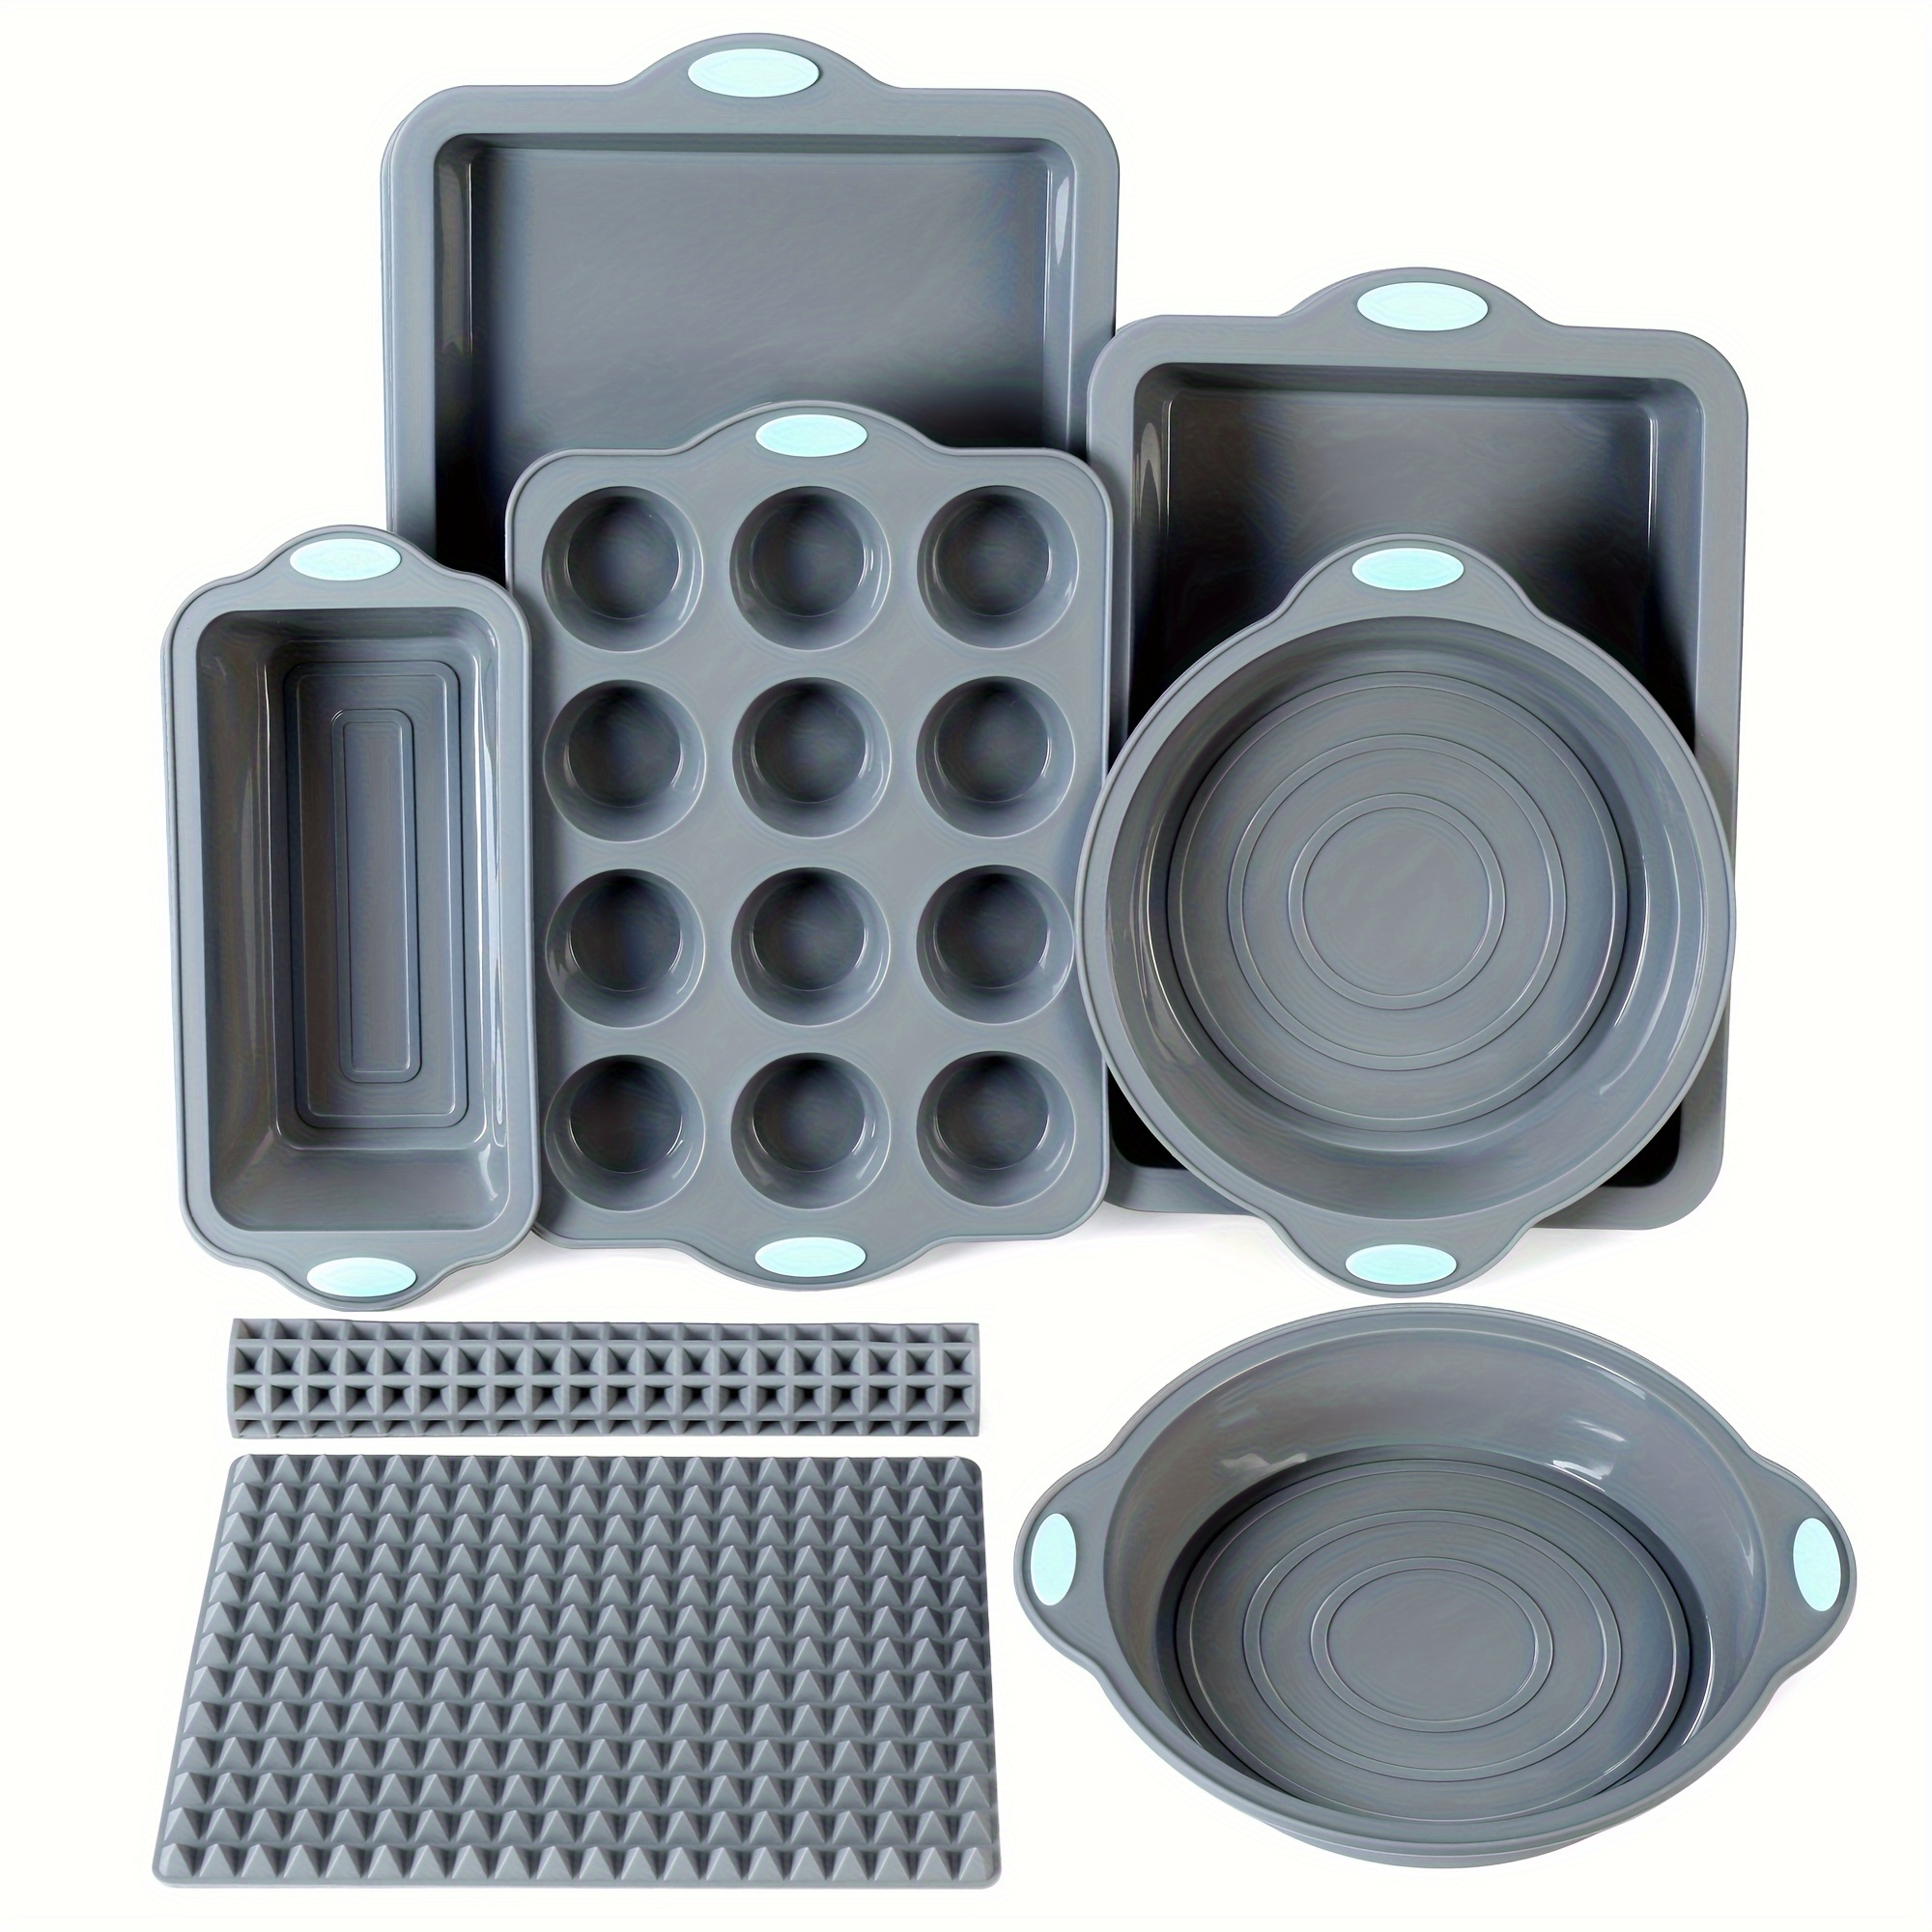 

8pcs Silicone Baking Pan Set - 6 Silicone Molds And 2 Silicone Baking Mat, Nonstick Cookie Sheet, Cake Muffin Bread Pan With Metal Reinforced Frame More Strength